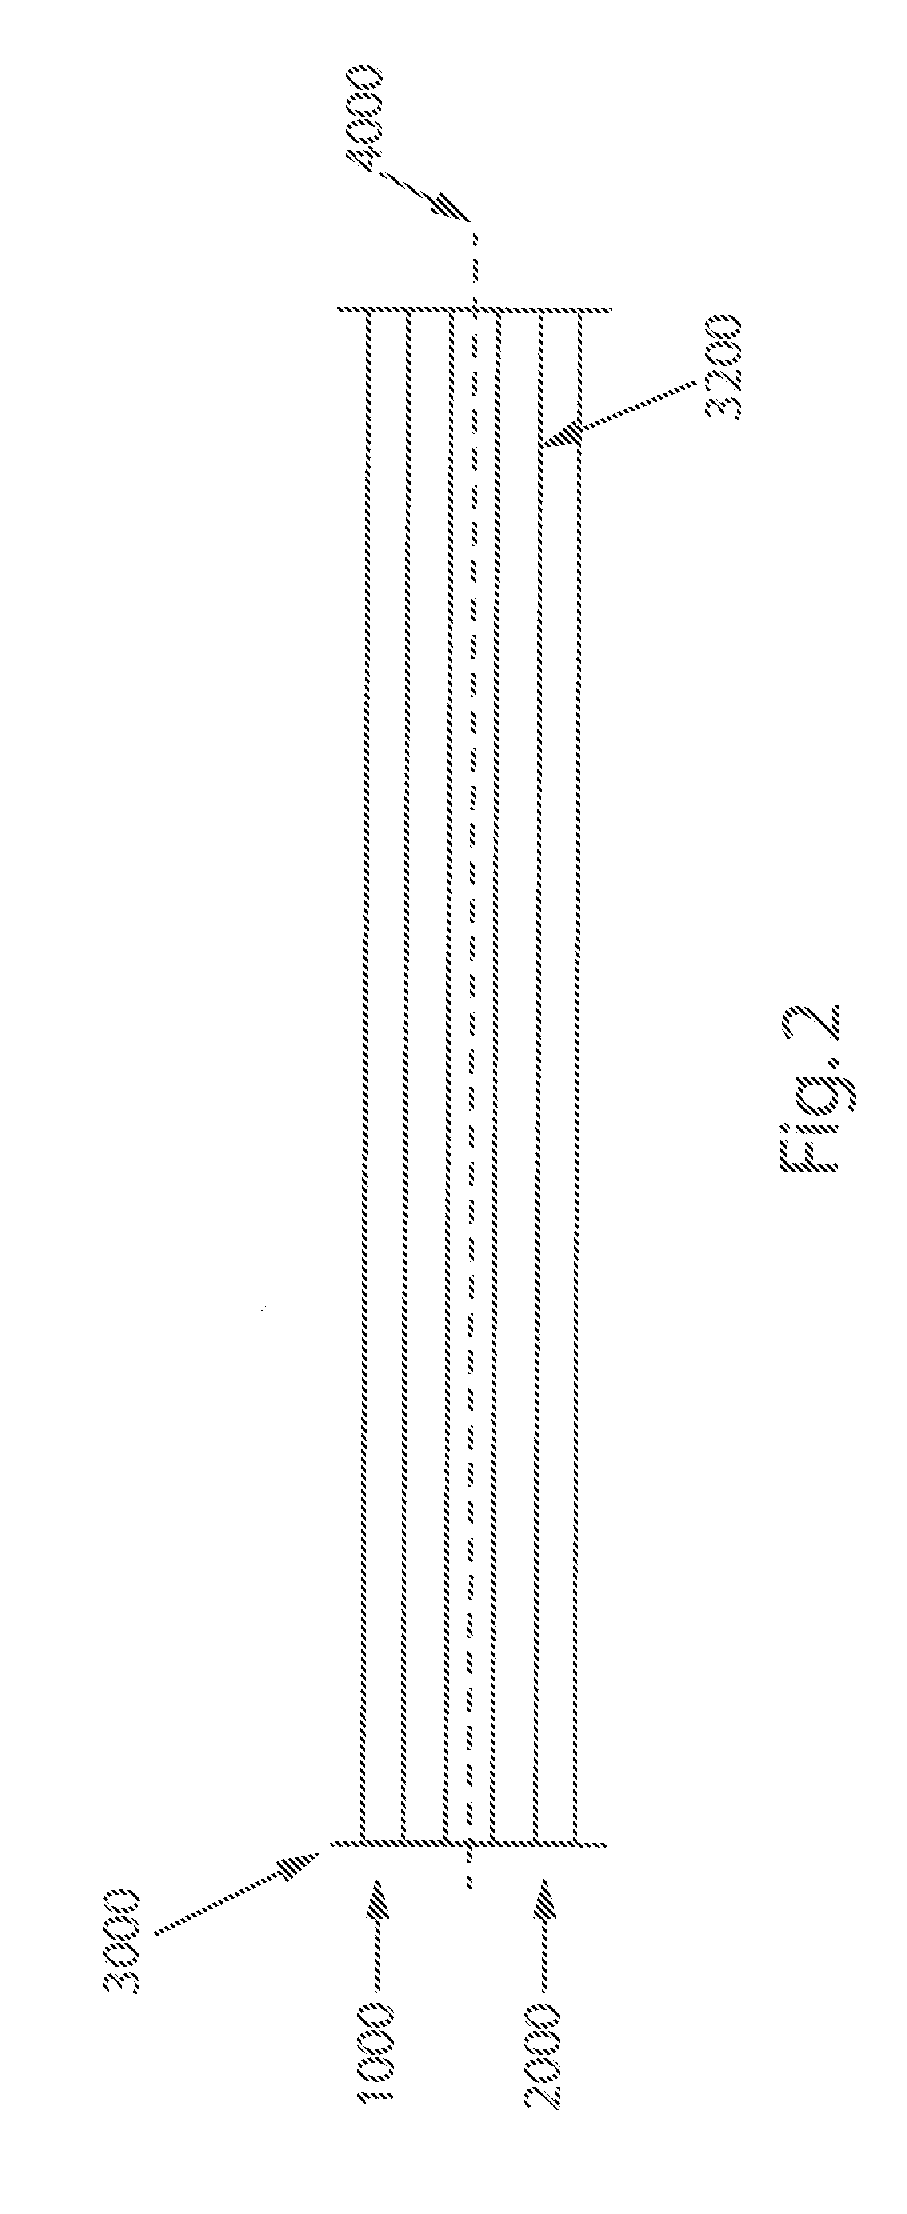 Absorbent Article With A Waistband And Leg Cuff Having Gathers